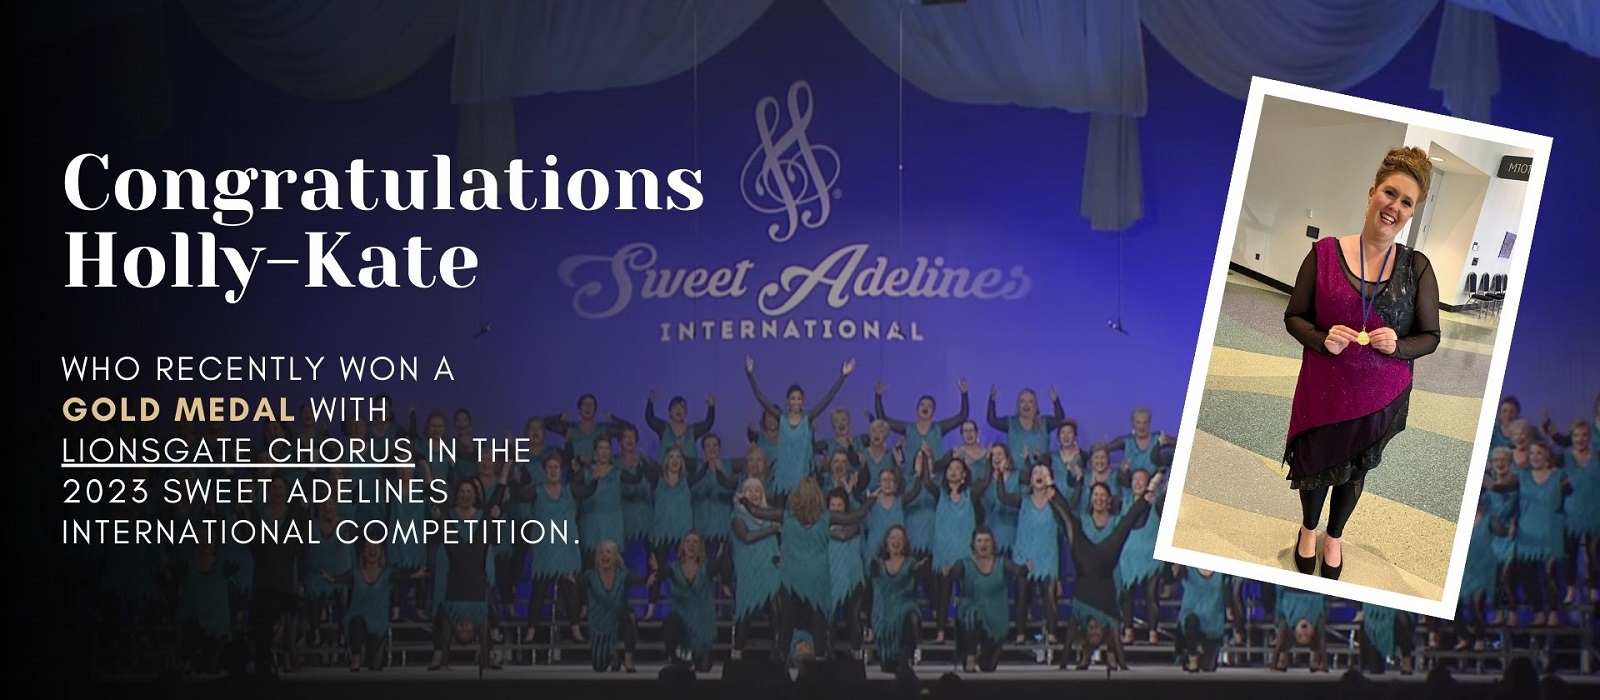 Holly-Kate 2023 Sweet Adelines International Competition